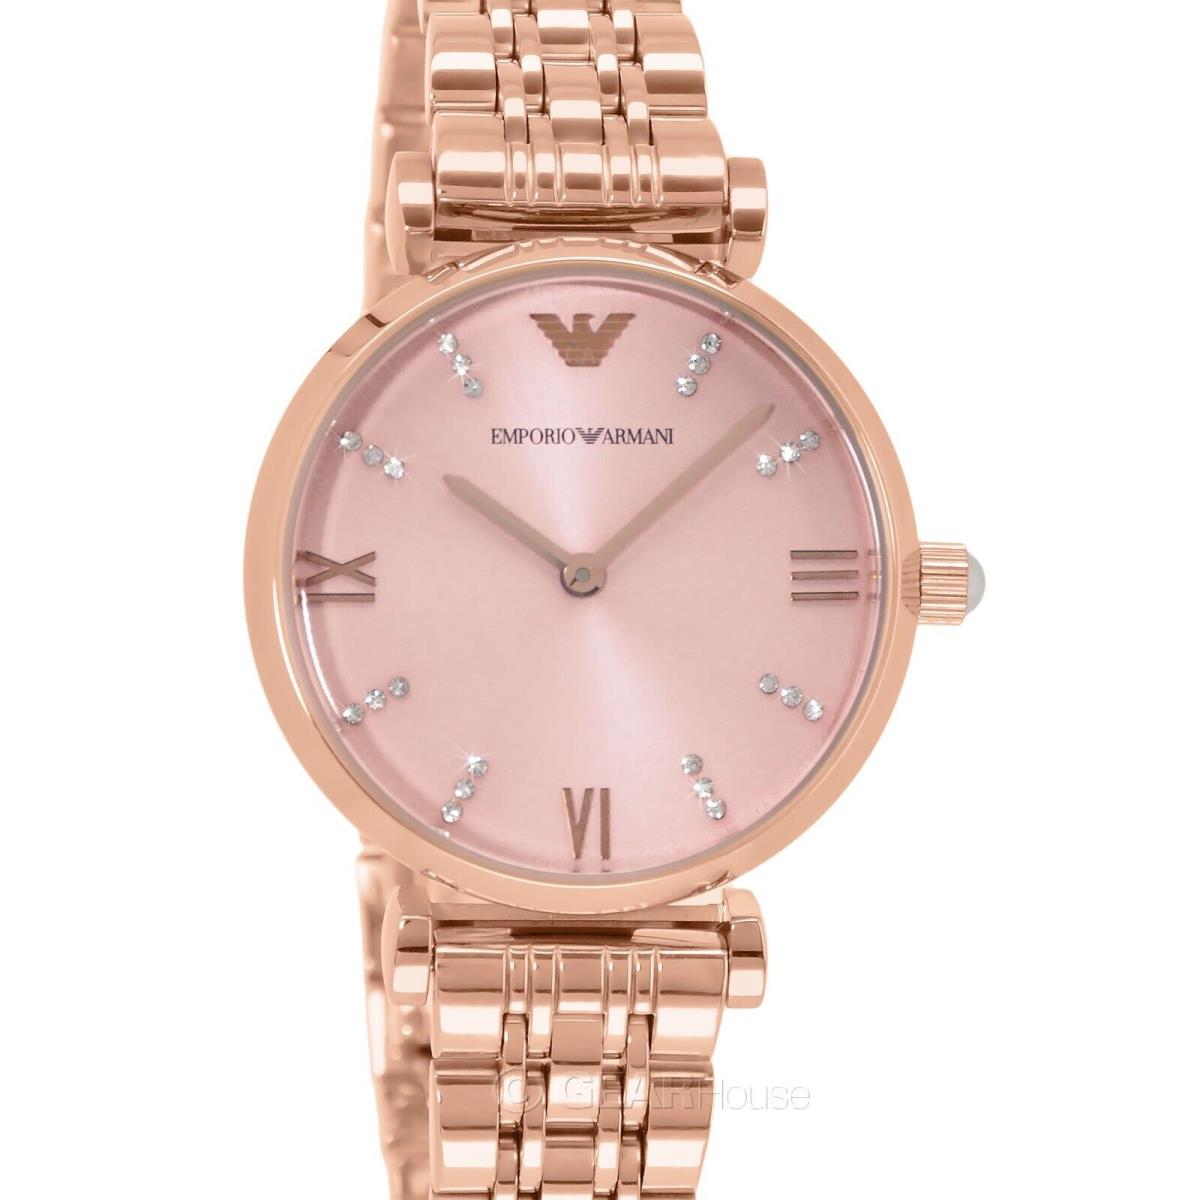 Emporio Armani Womens Rose Gold Dress Watch Crystals Dial Stainless Steel B